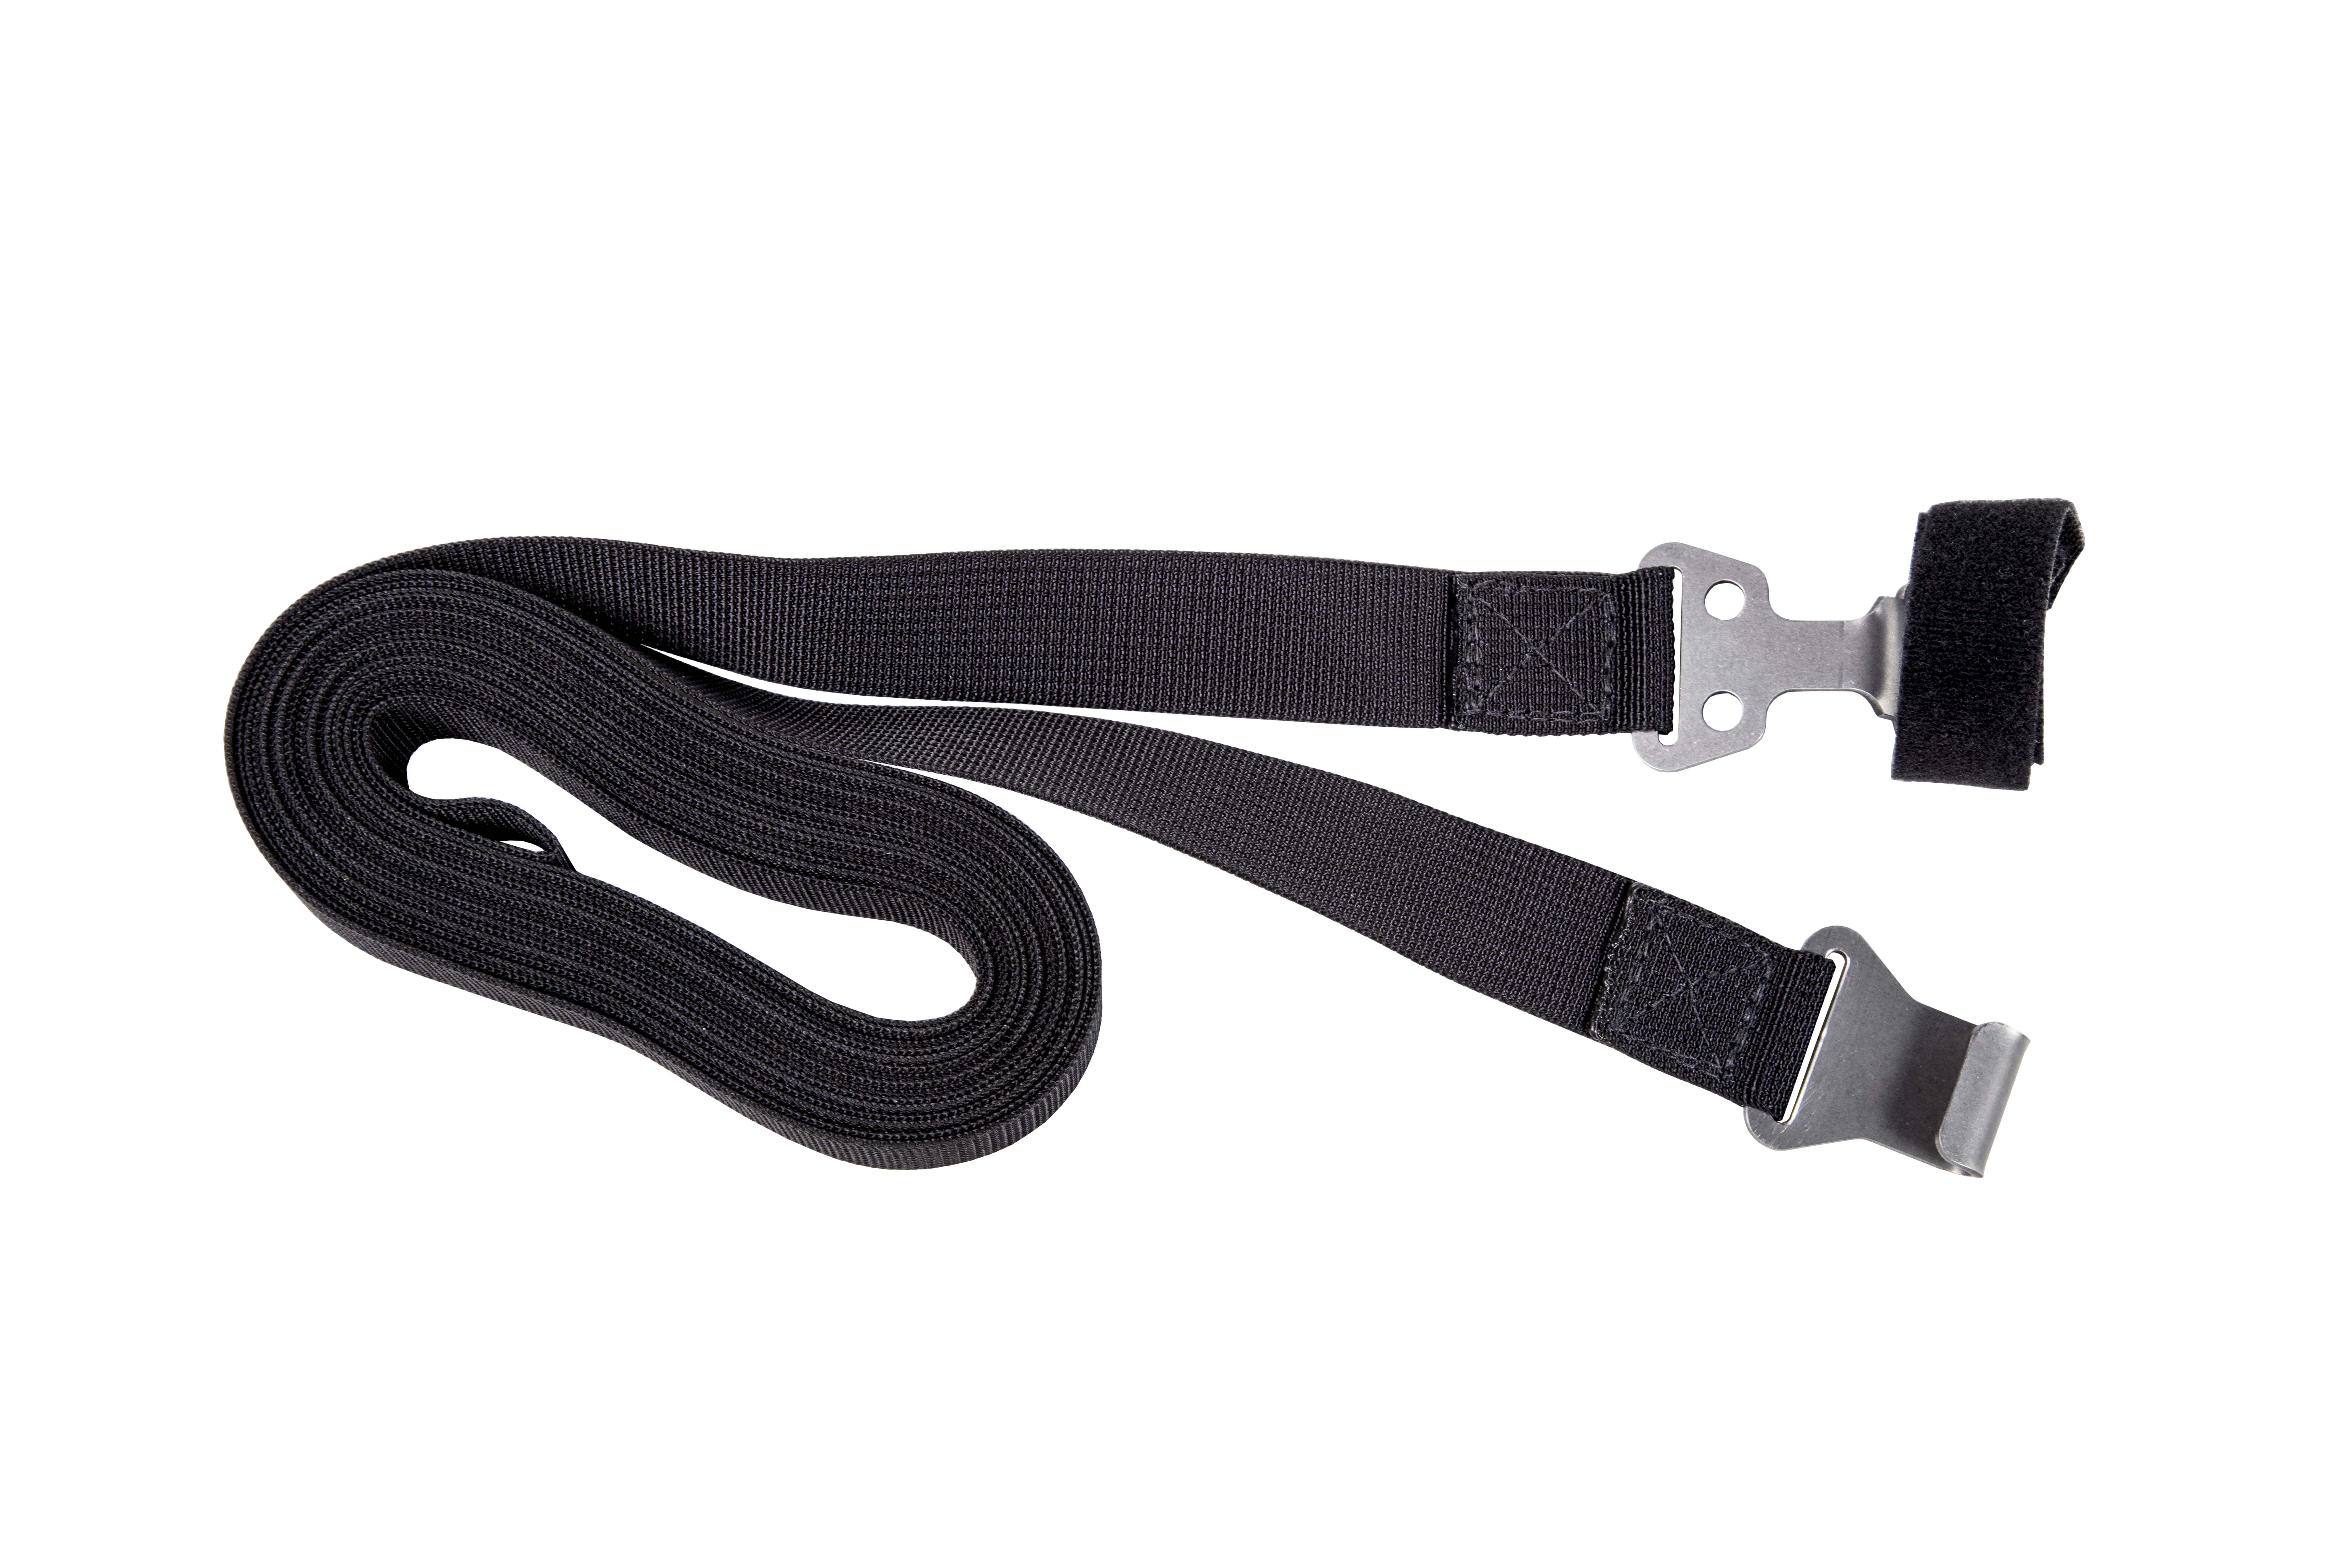 Strap Extender from Columbia Safety